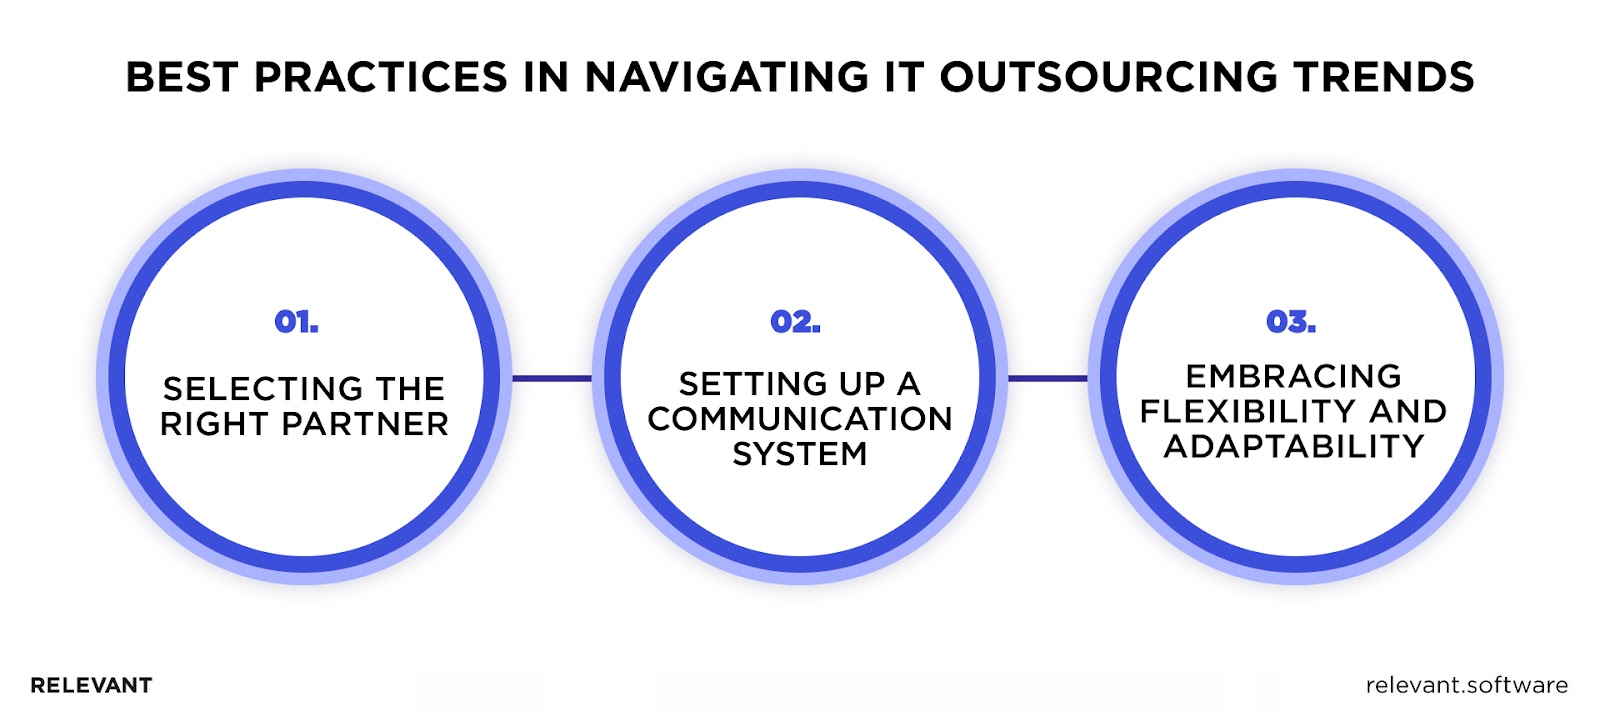 Best Practices of IT Outsourcing Trends 